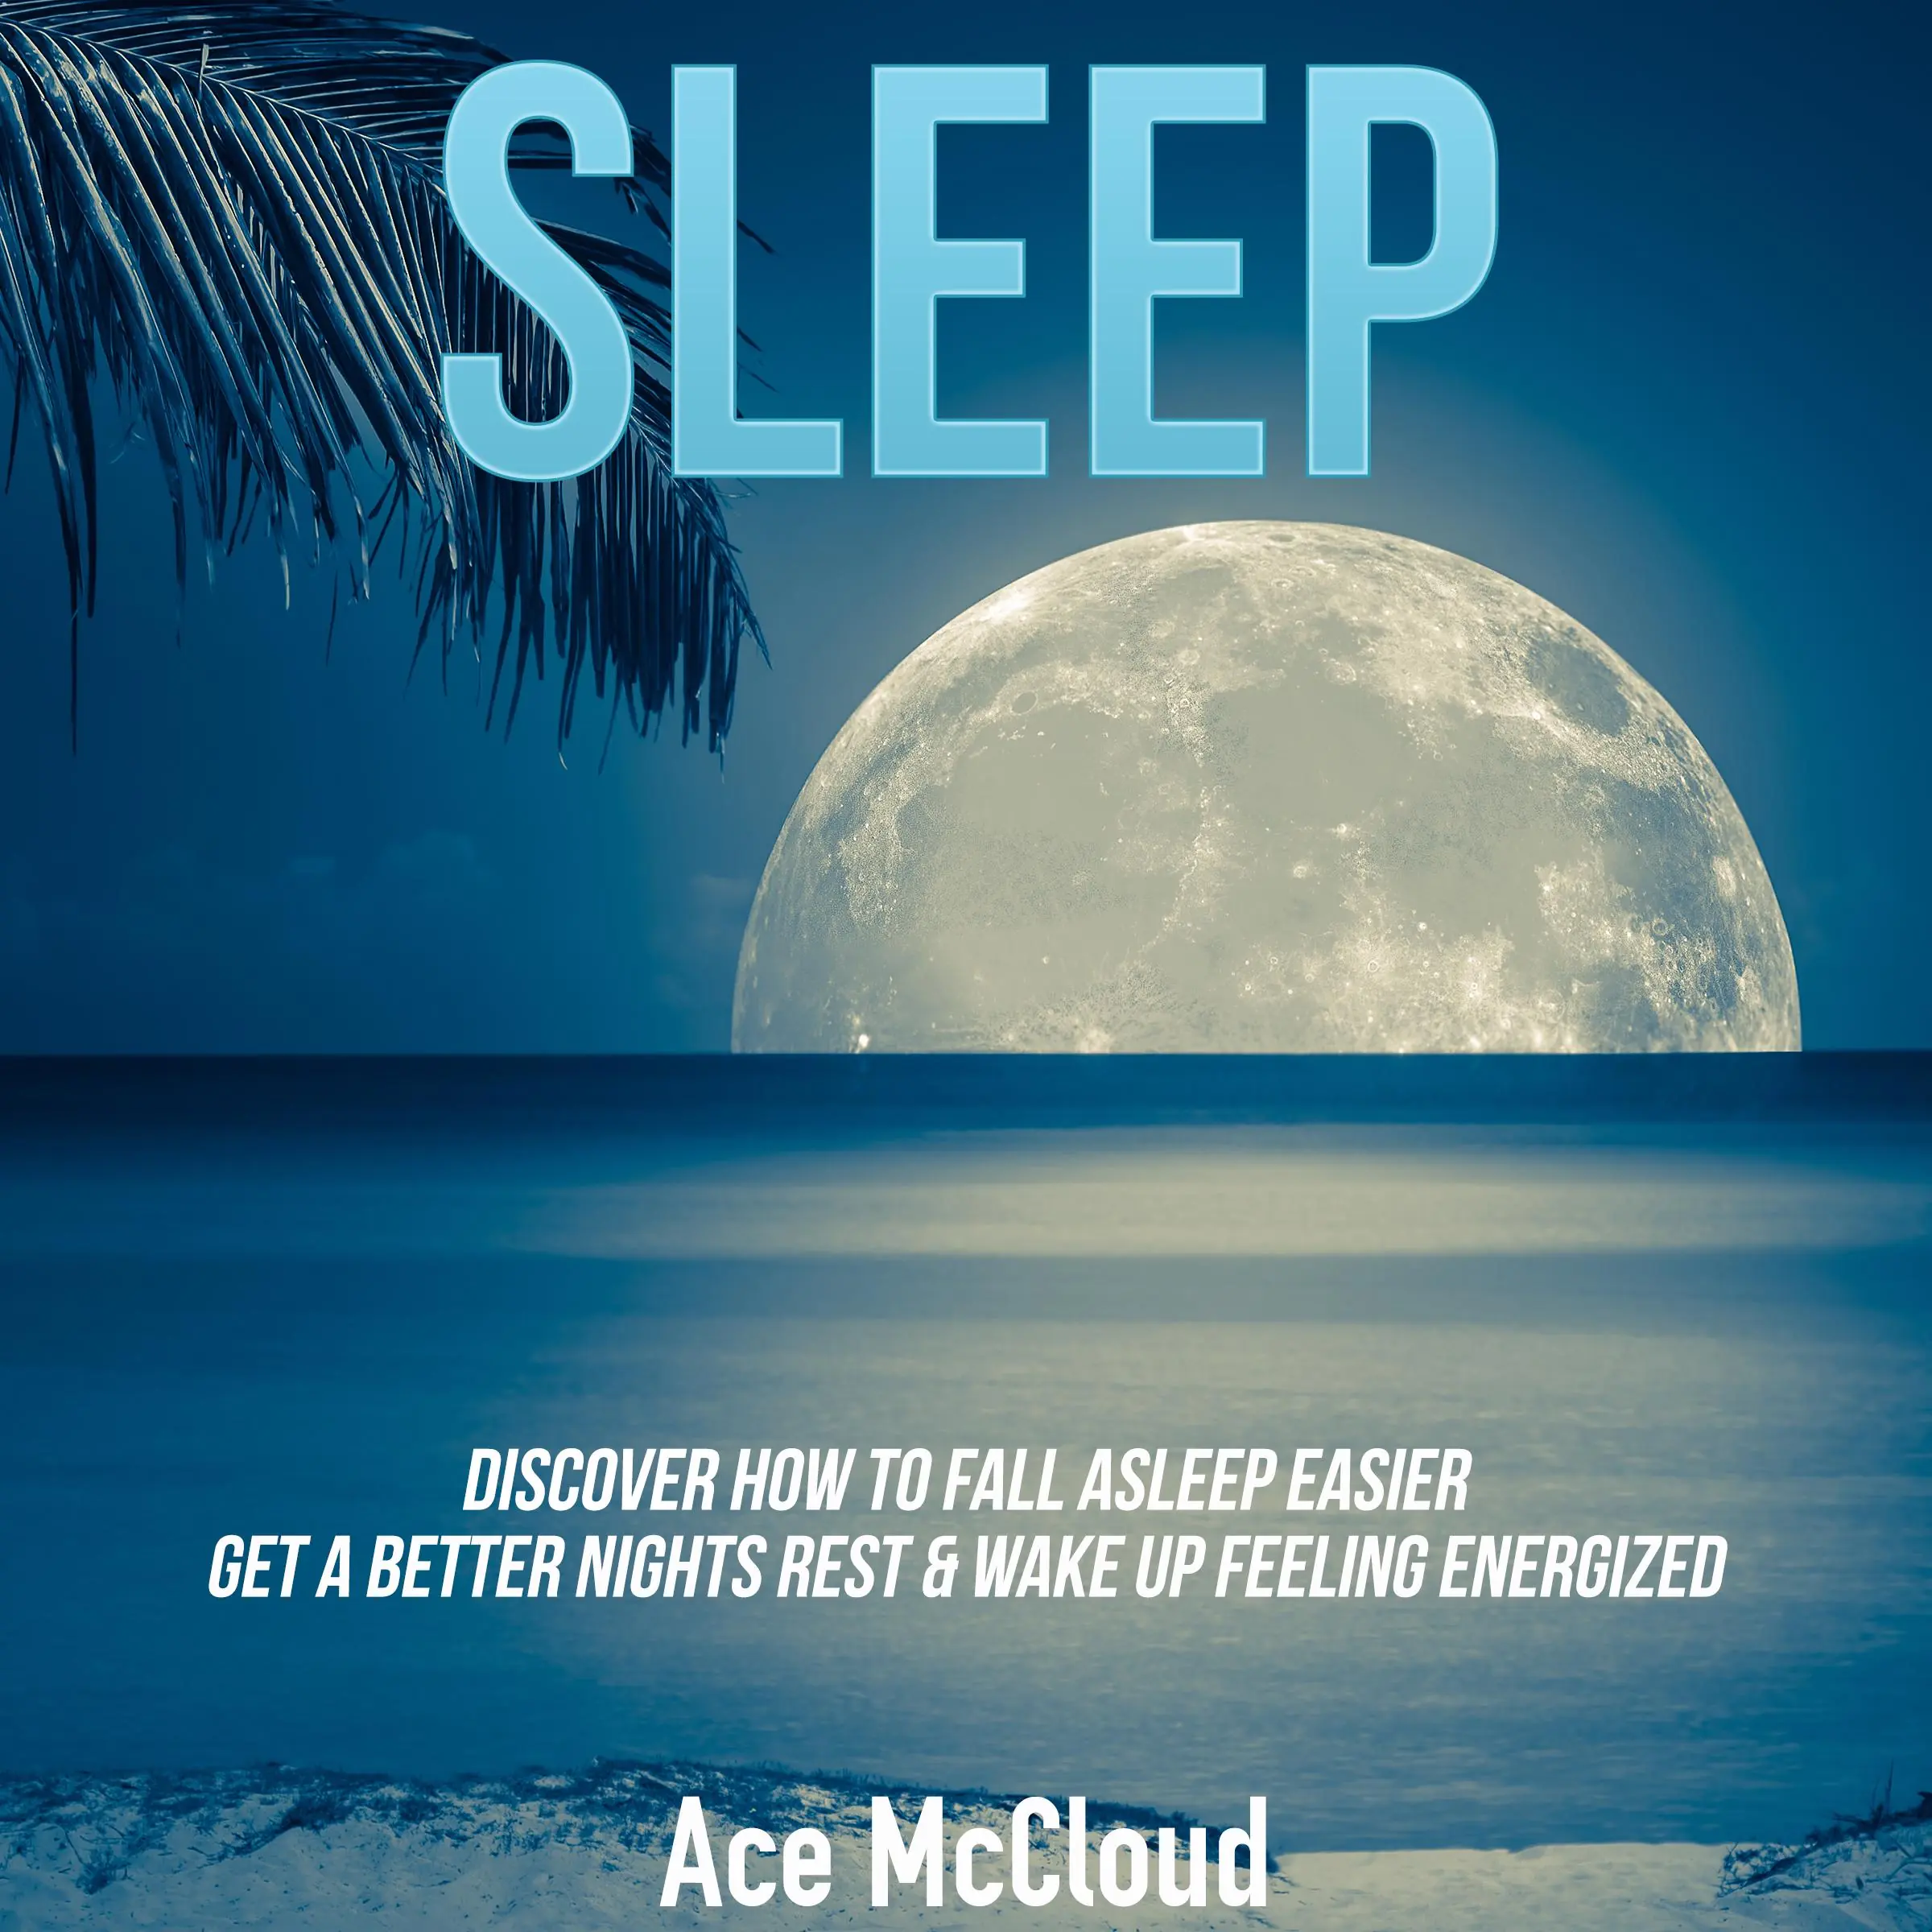 Sleep: Discover How To Fall Asleep Easier, Get A Better Nights Rest & Wake Up Feeling Energized by Ace McCloud Audiobook